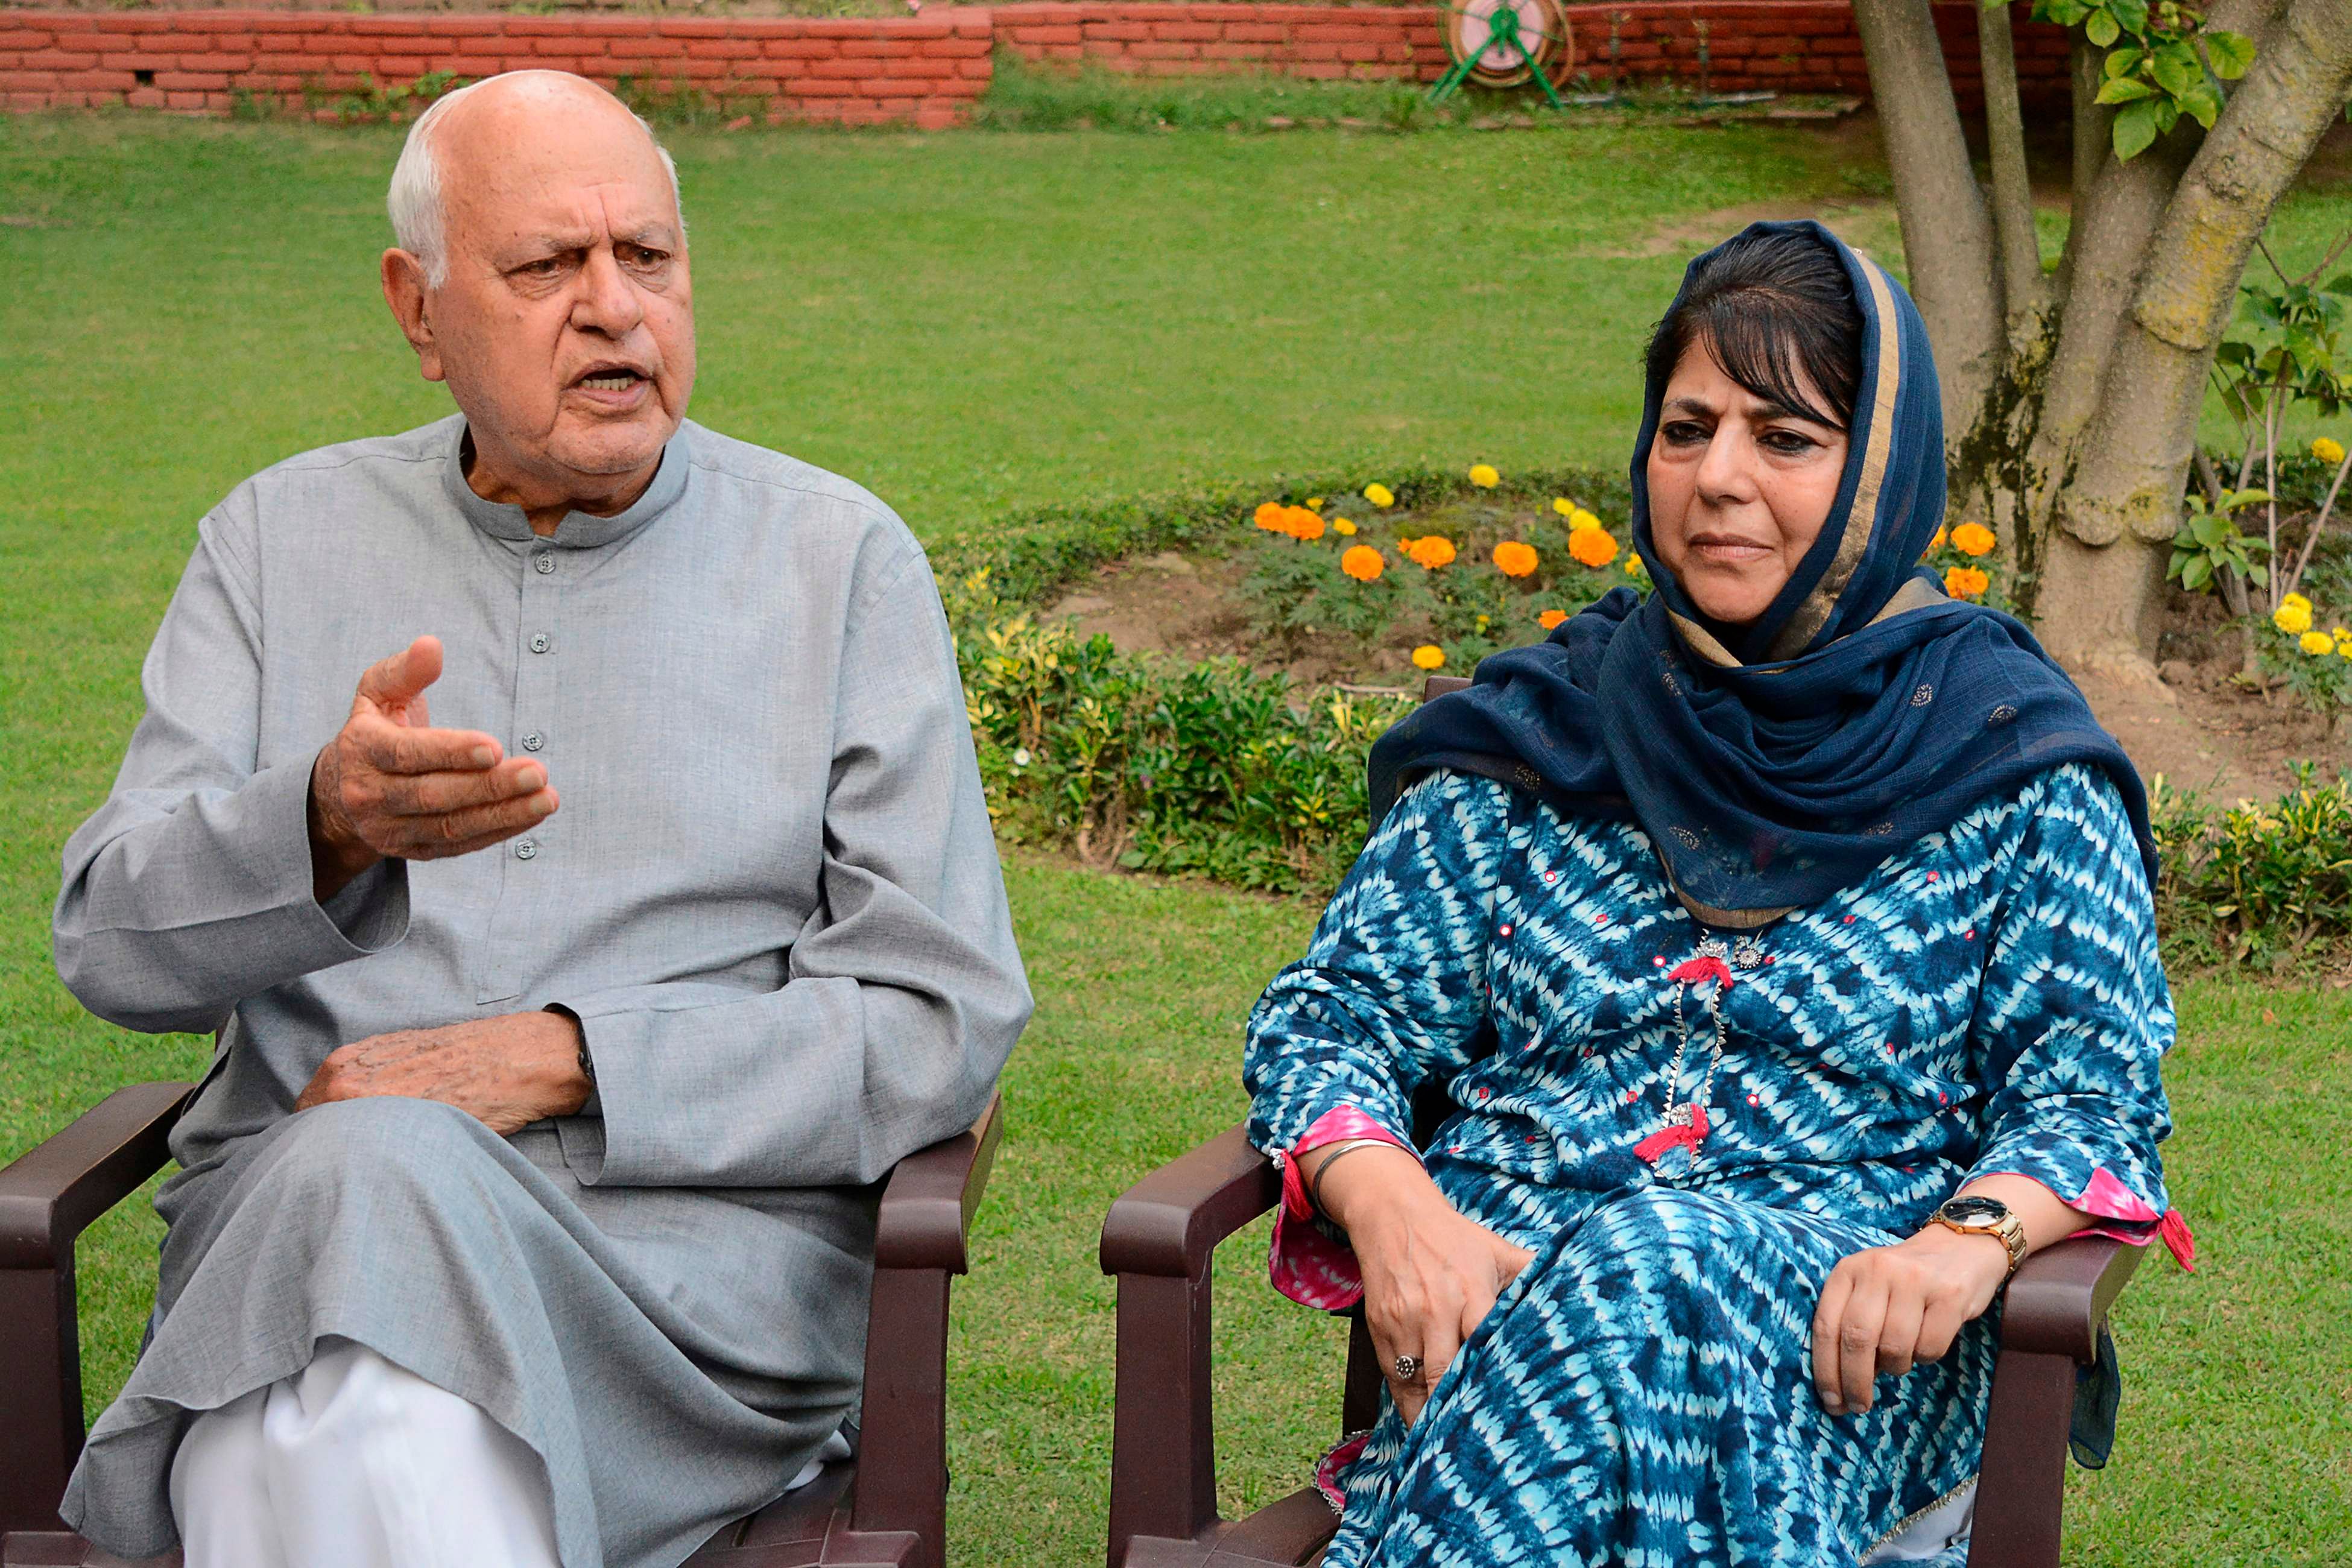 Former Chief Minister of Peoples Democratic Party (PDP) Mehbooba Mufty (R) with Former Chief Minister and Parliament member of National Confreence Farooq Abdullah. (AFP Photo)